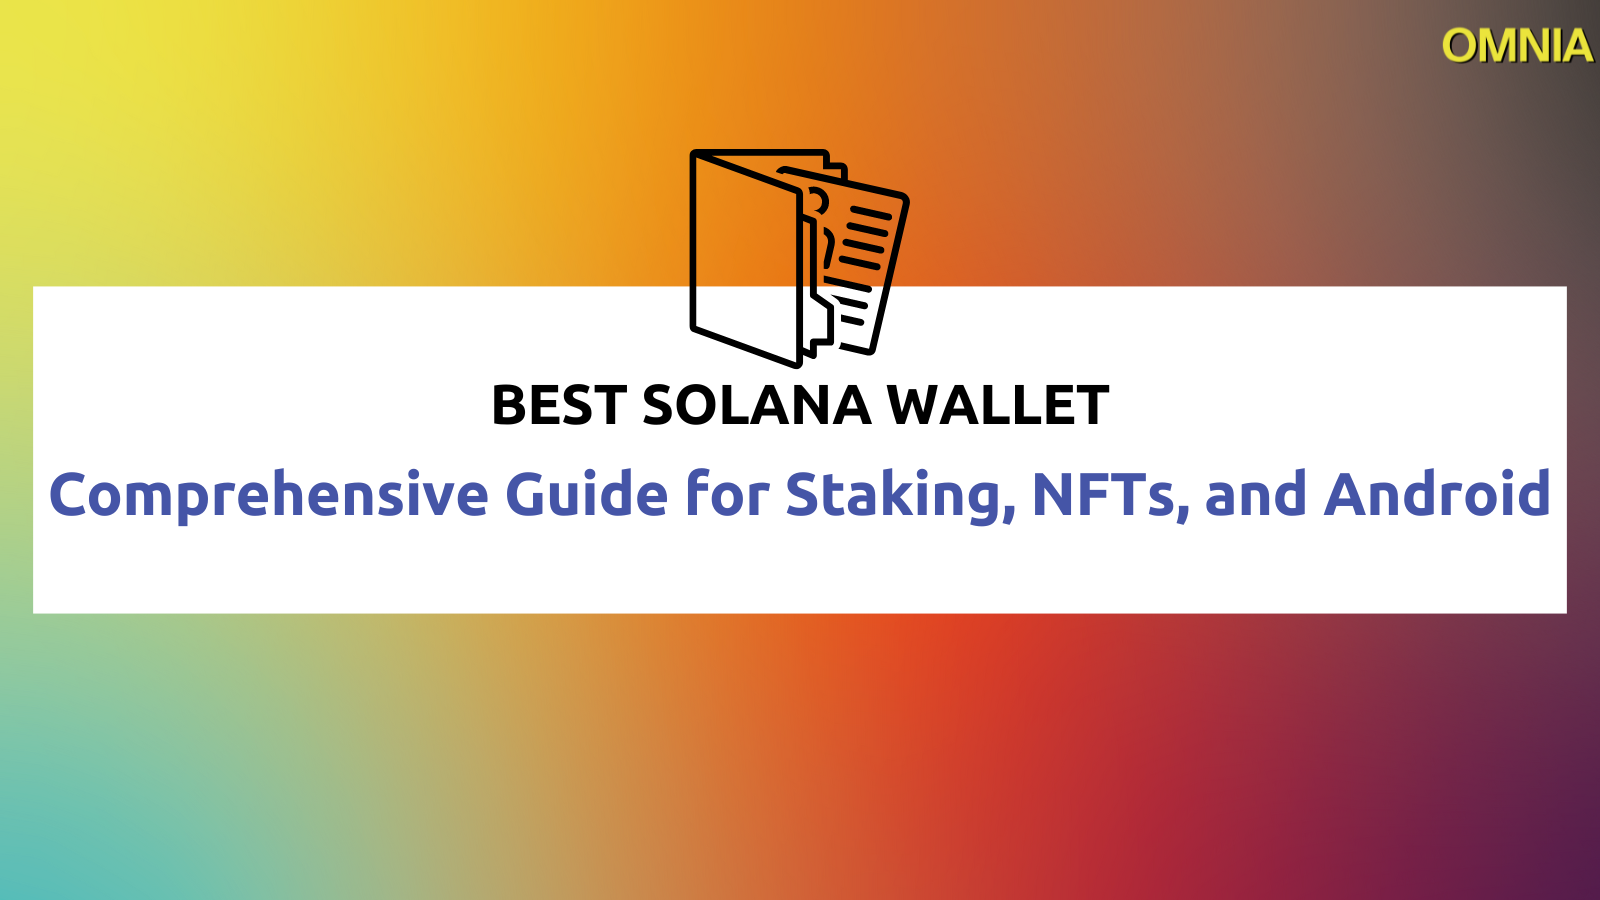 Best Solana Wallet – Comprehensive Guide for Staking, NFTs, and Android